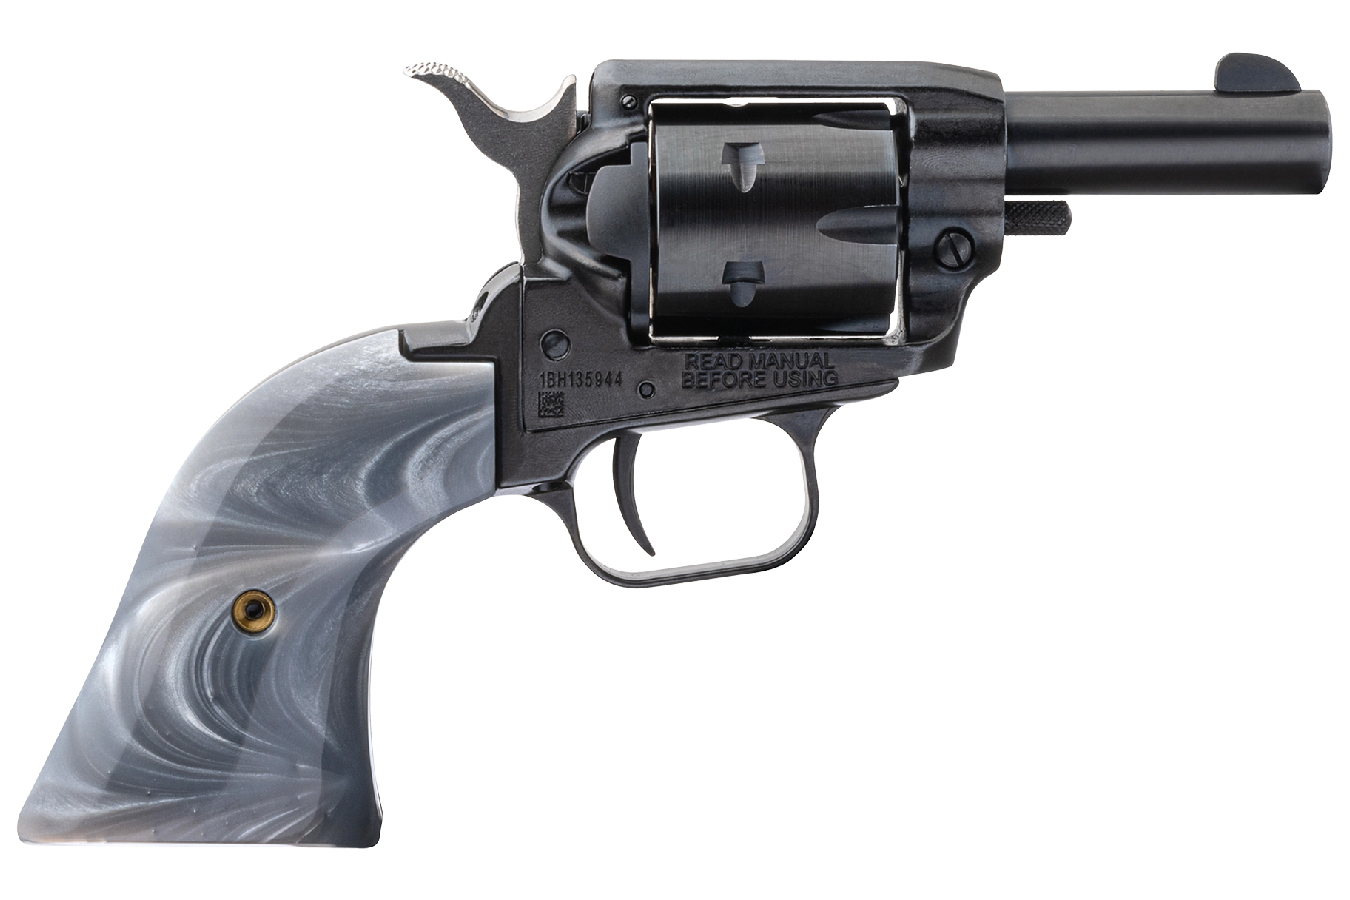 BARKEEP 22LR REVOLVER WITH GRAY PEARL GRIP